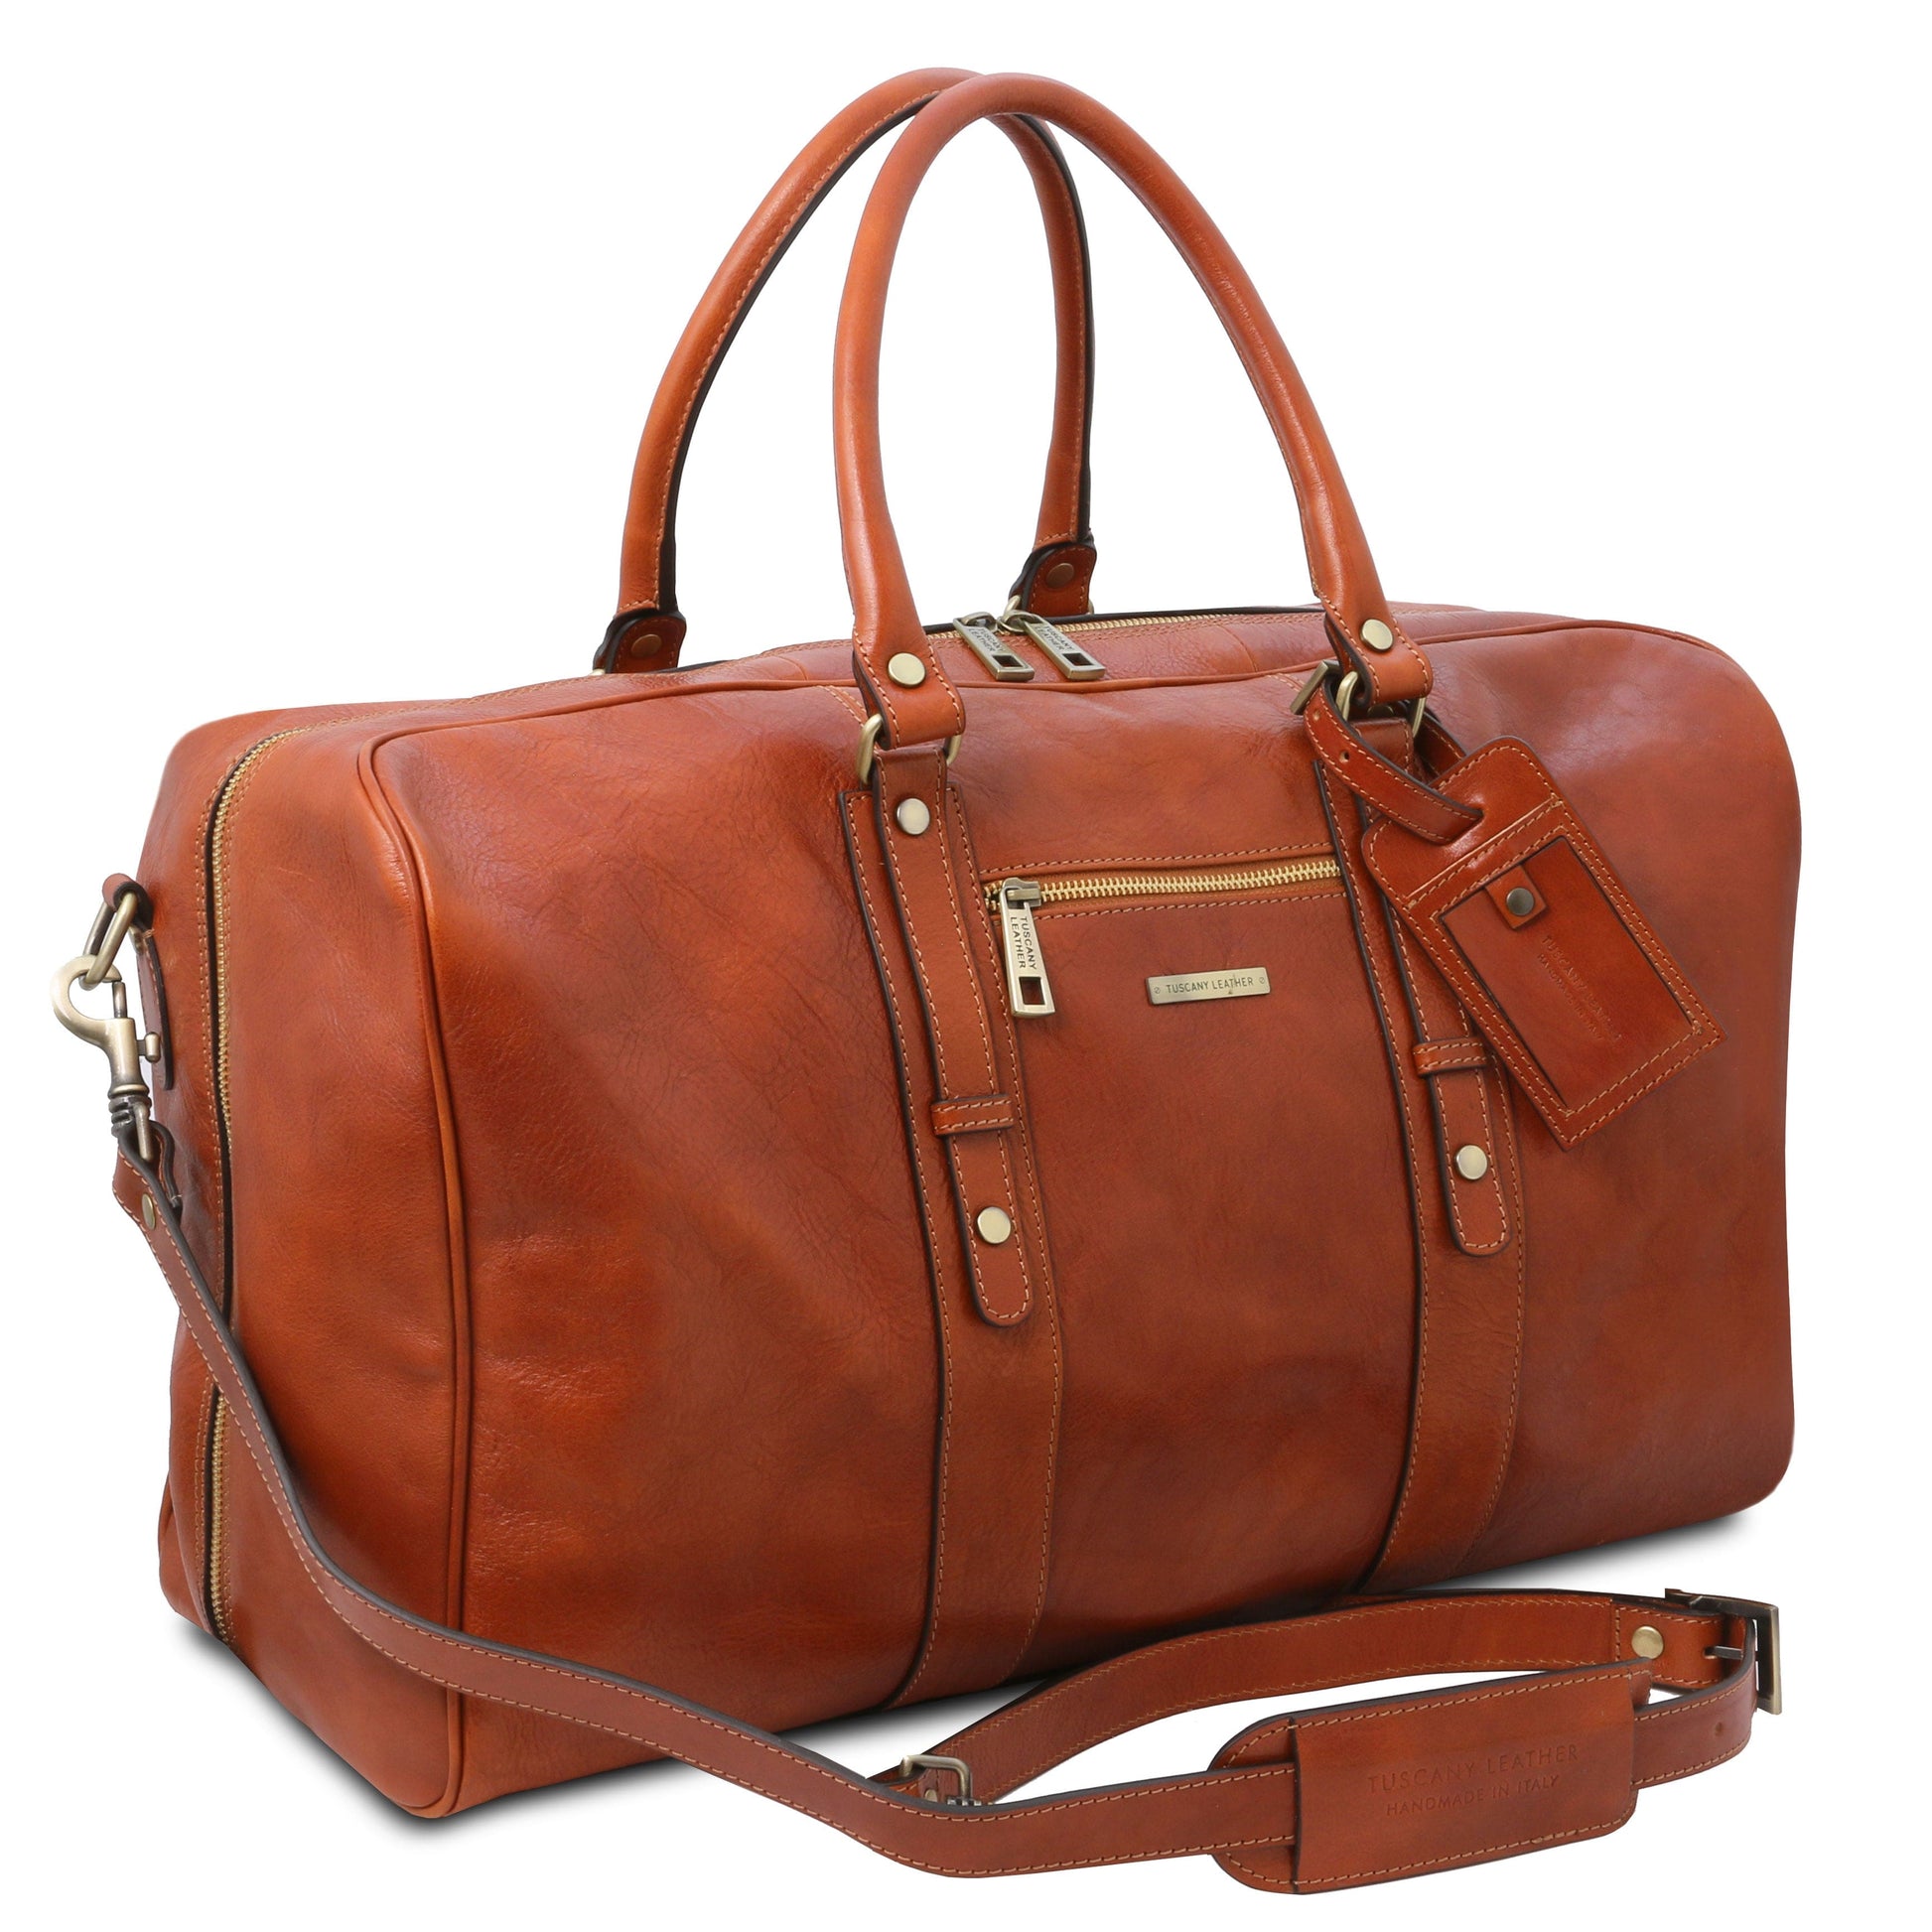 TL Voyager - Leather travel bag with front pocket | TL142140 - Premium Leather Travel bags - Shop now at San Rocco Italia